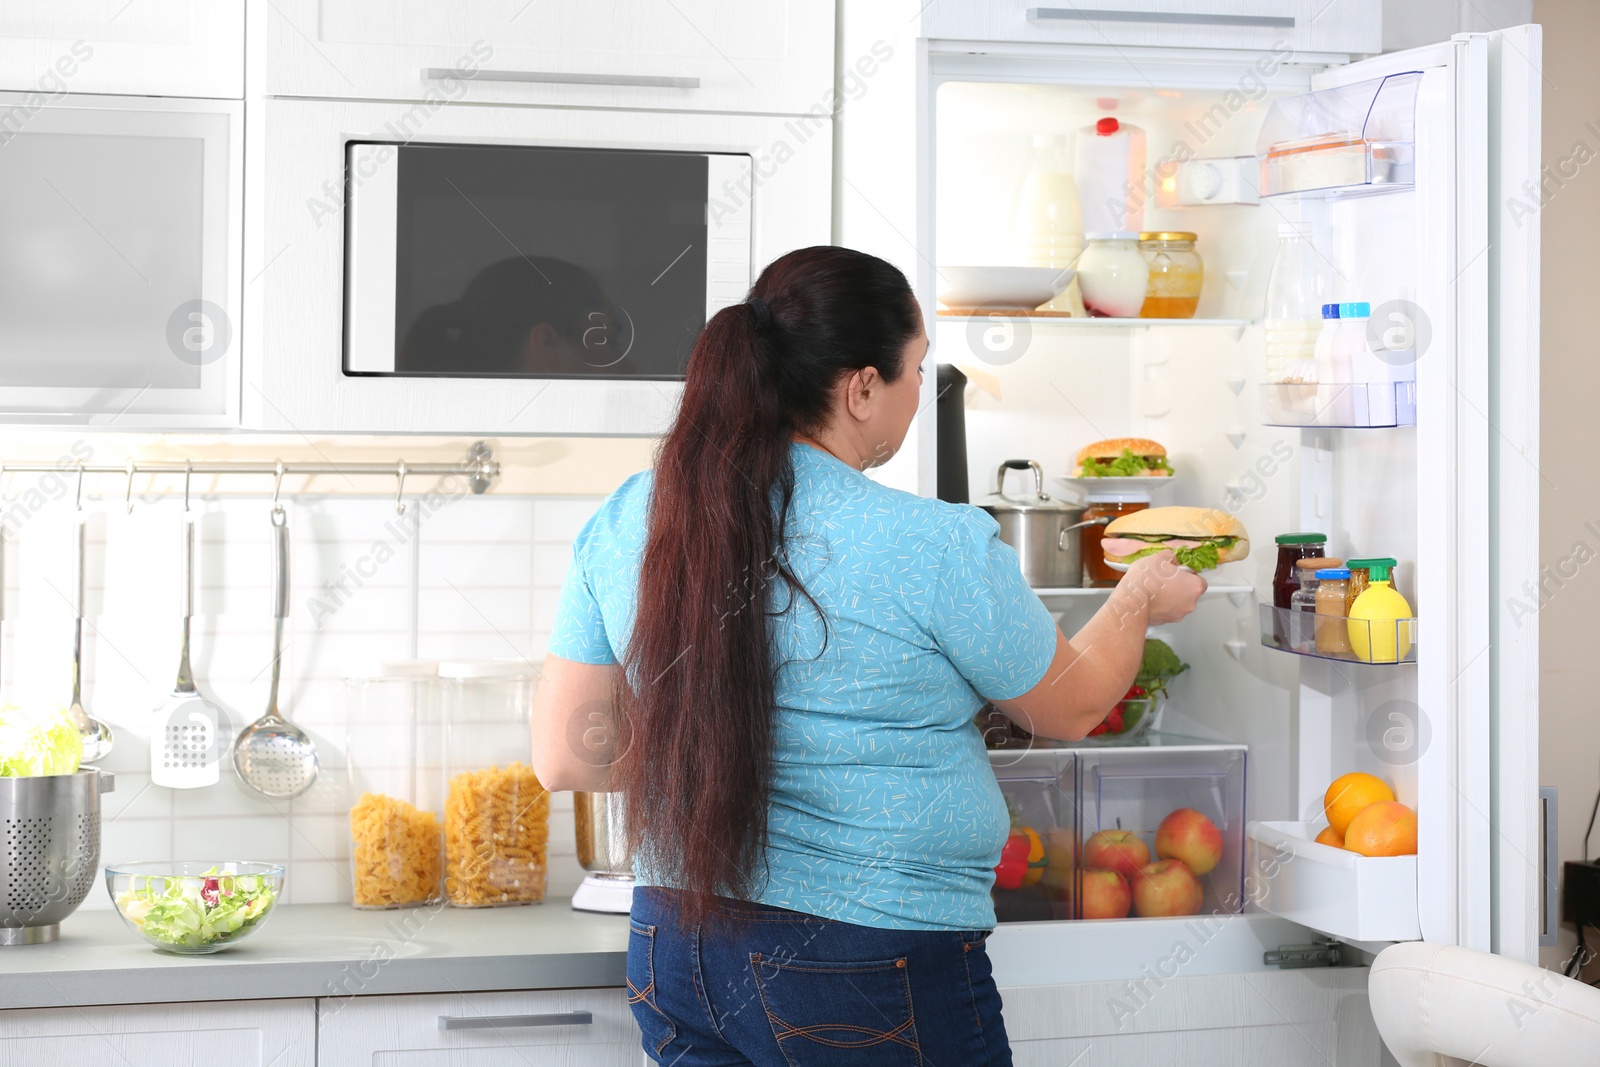 Photo of Overweight woman taking sandwich from refrigerator in kitchen. Failed diet